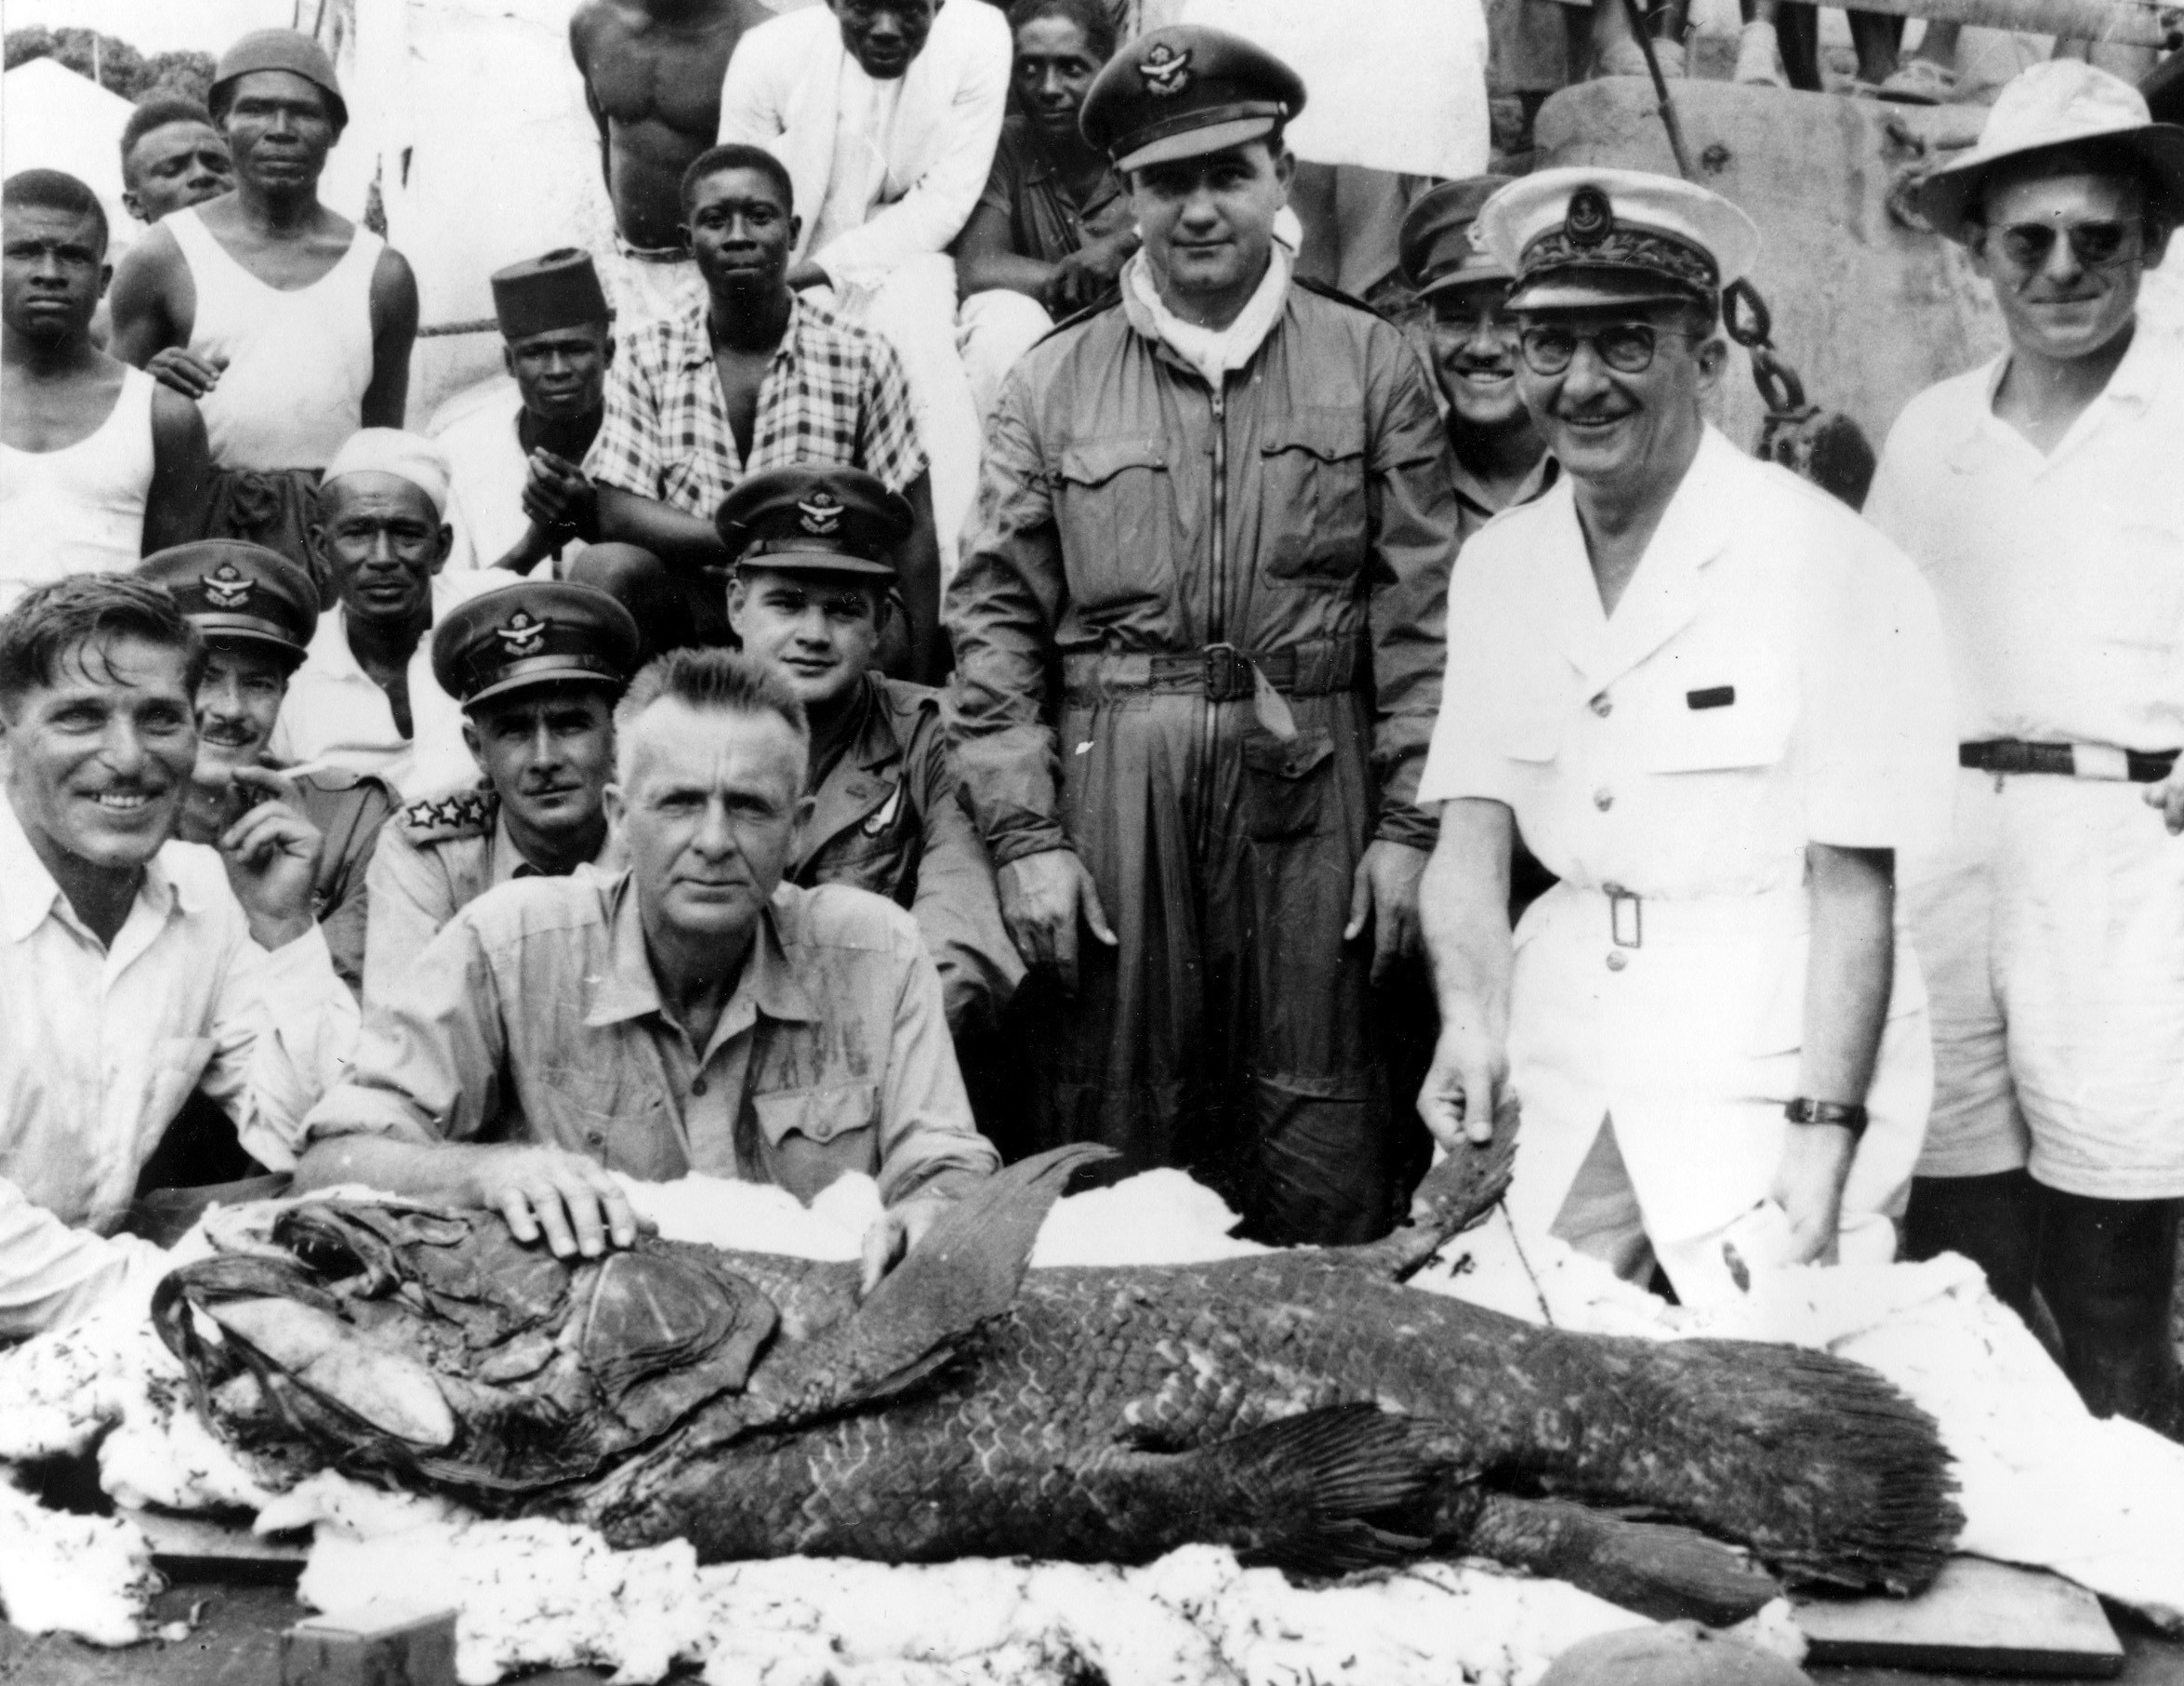 Scientists and sailors pose with a 54 kg coelacanth caught off the coast of Madagascar in 1953. (Image: Associated Press, AP)